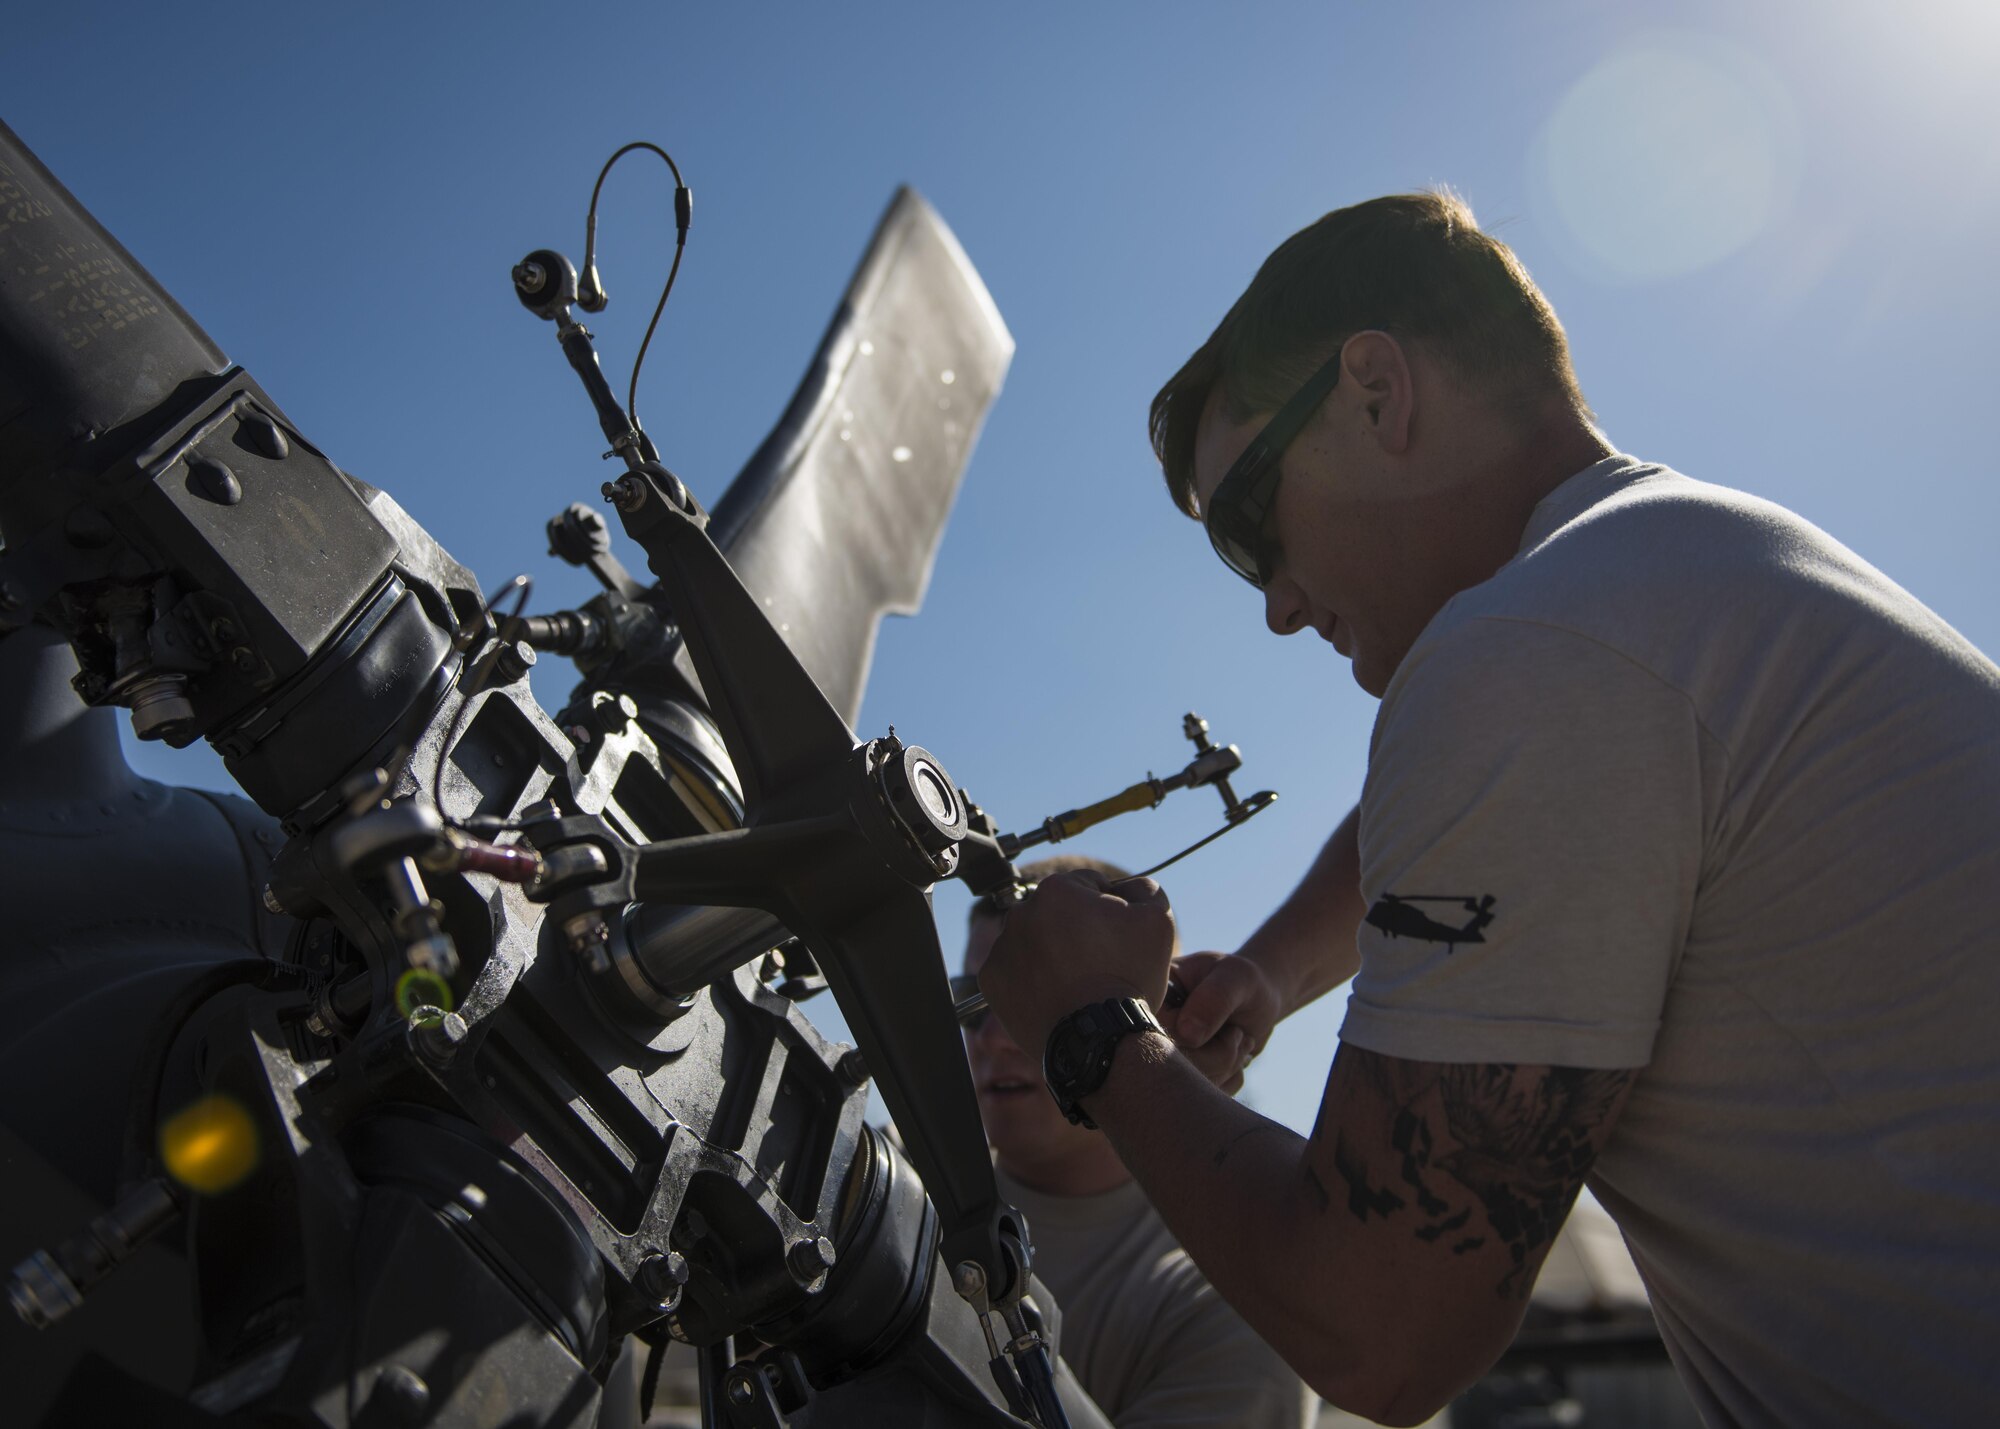 Staff Sgt. Sam Carroll, HH-60 Aircraft Maintenance Unit, unfolds a tail rotor, Bagram Airfield, Afghanistan, Sept. 26, 2016. The HH-60G is a derivative of the UH-60 Black Hawk and incorporates the US Air Force Precision Avionics Vectoring Equipment with its main mission to insert and recover isolated personnel. (U.S. Air Force photo by Senior Airman Justyn M. Freeman)